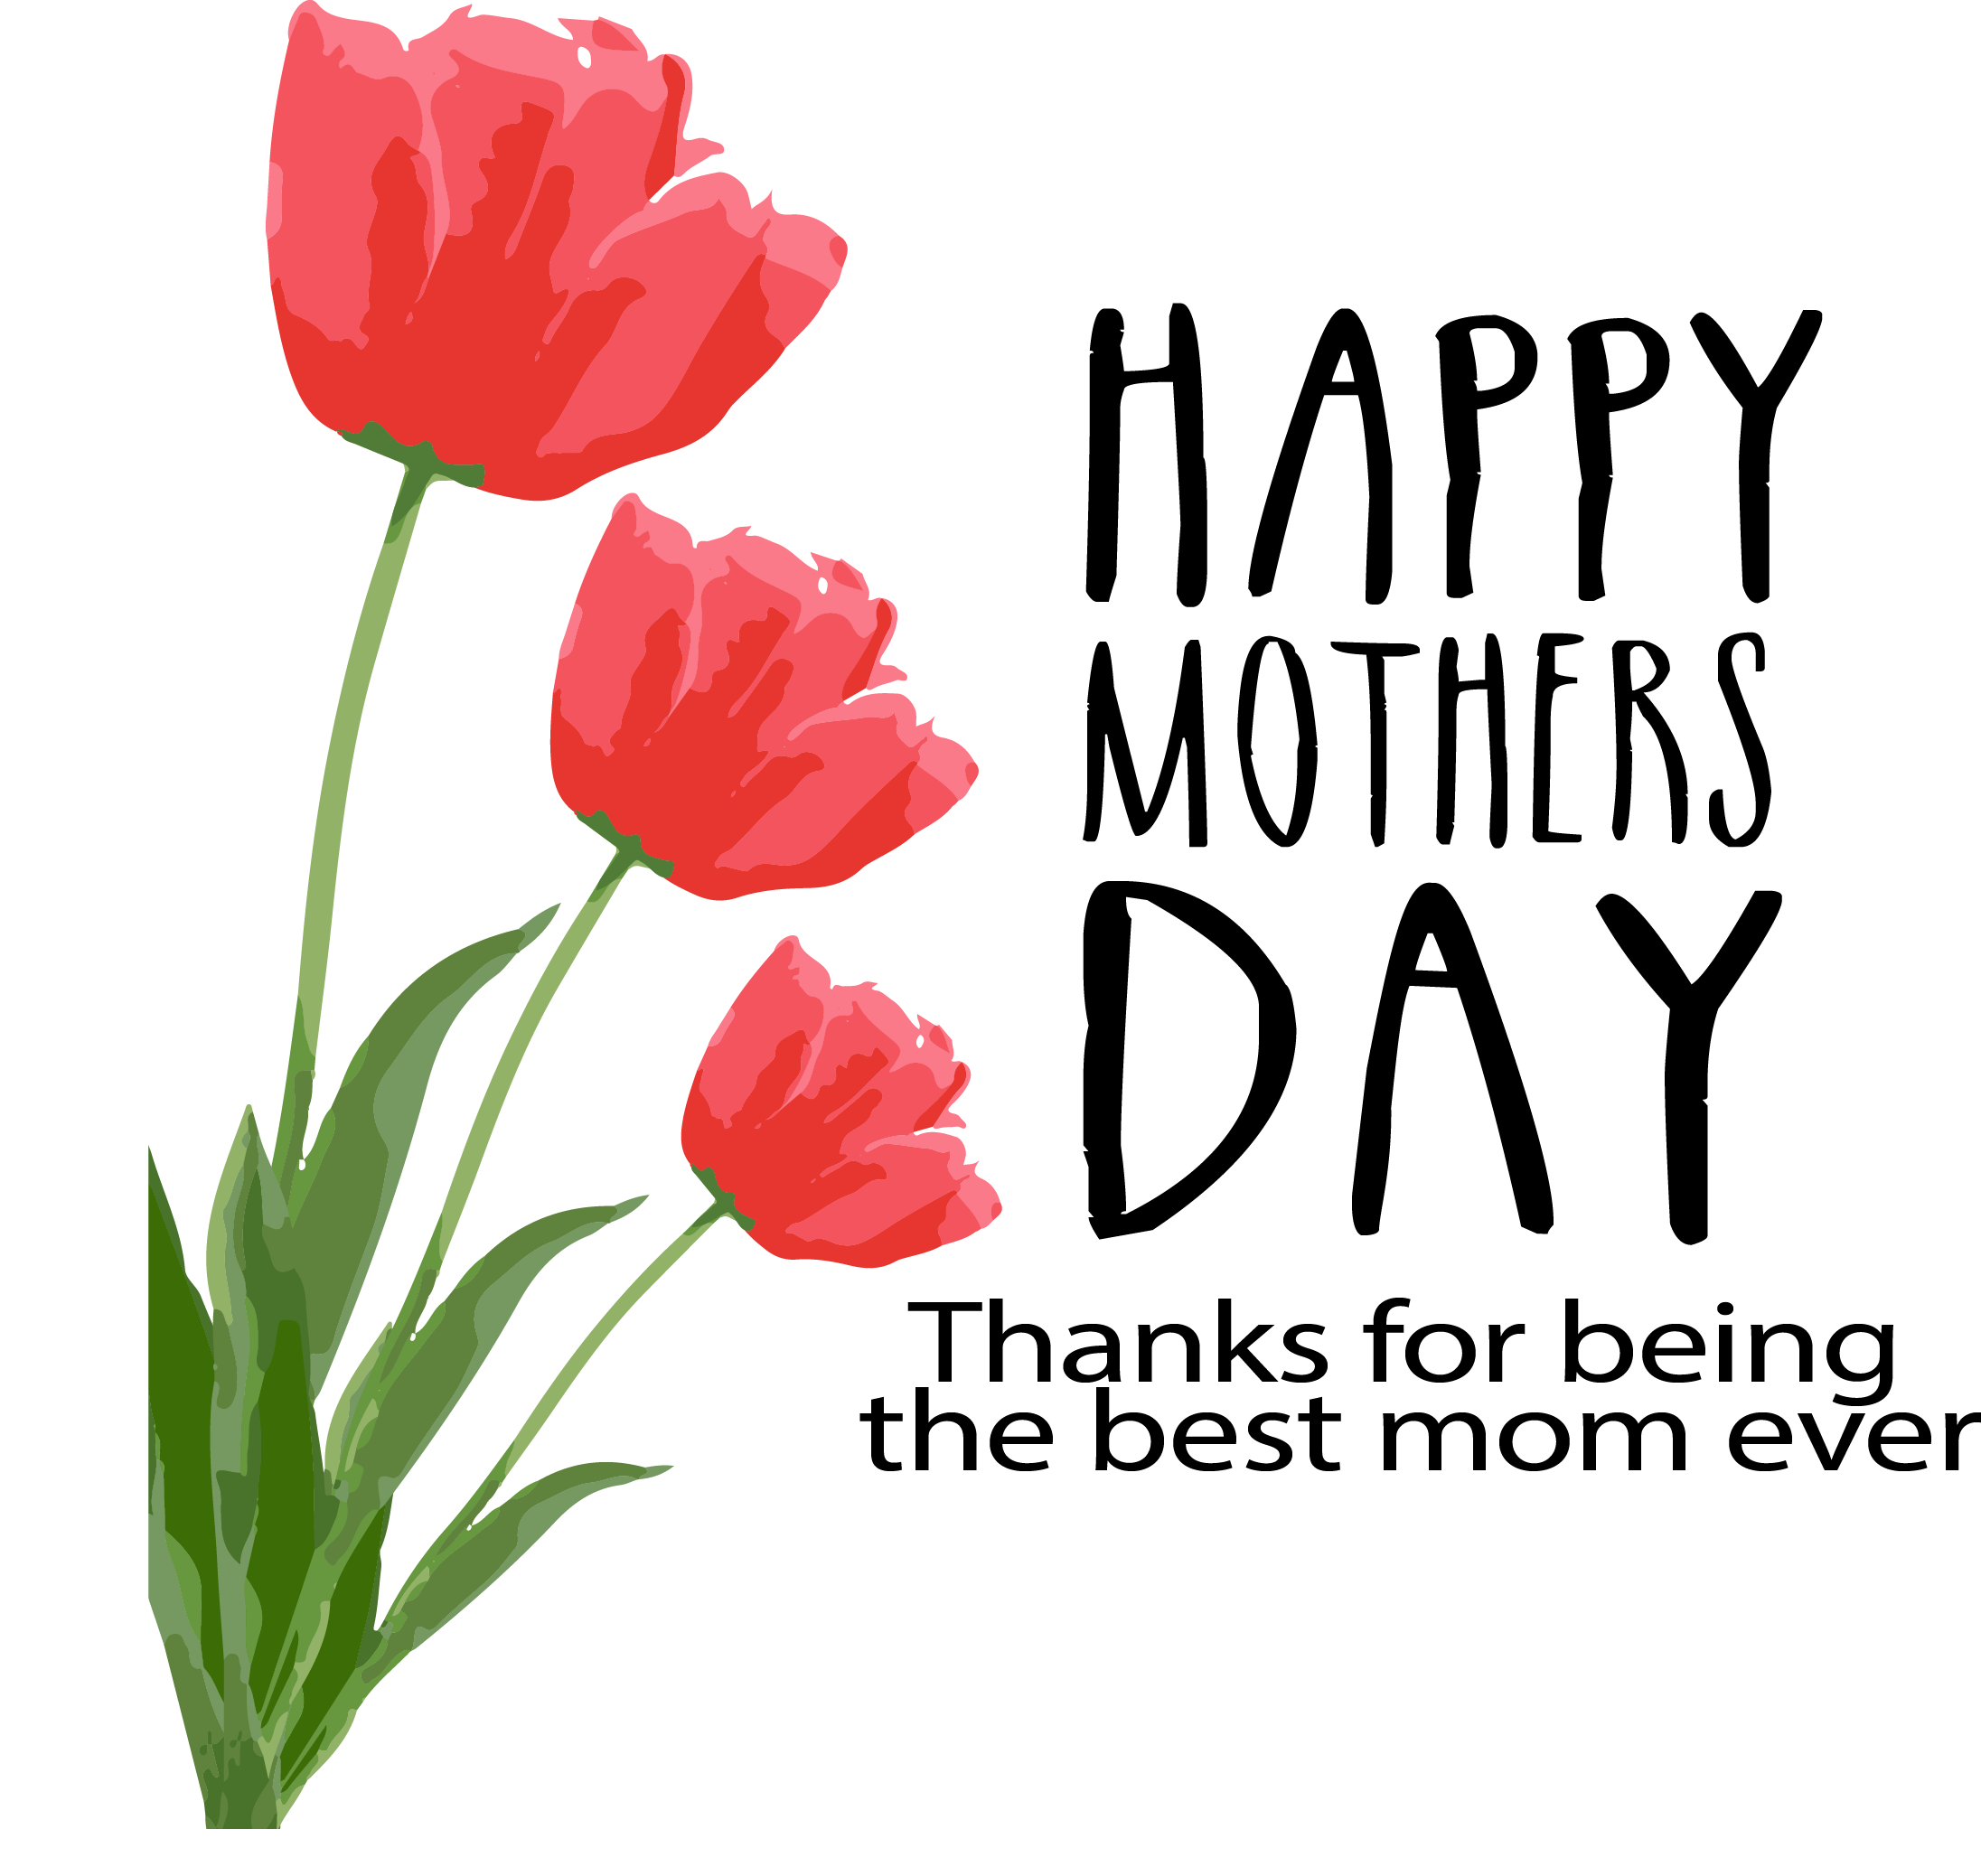 https://www.pngall.com/wp-content/uploads/5/Mothers-Day-PNG-Clipart.png